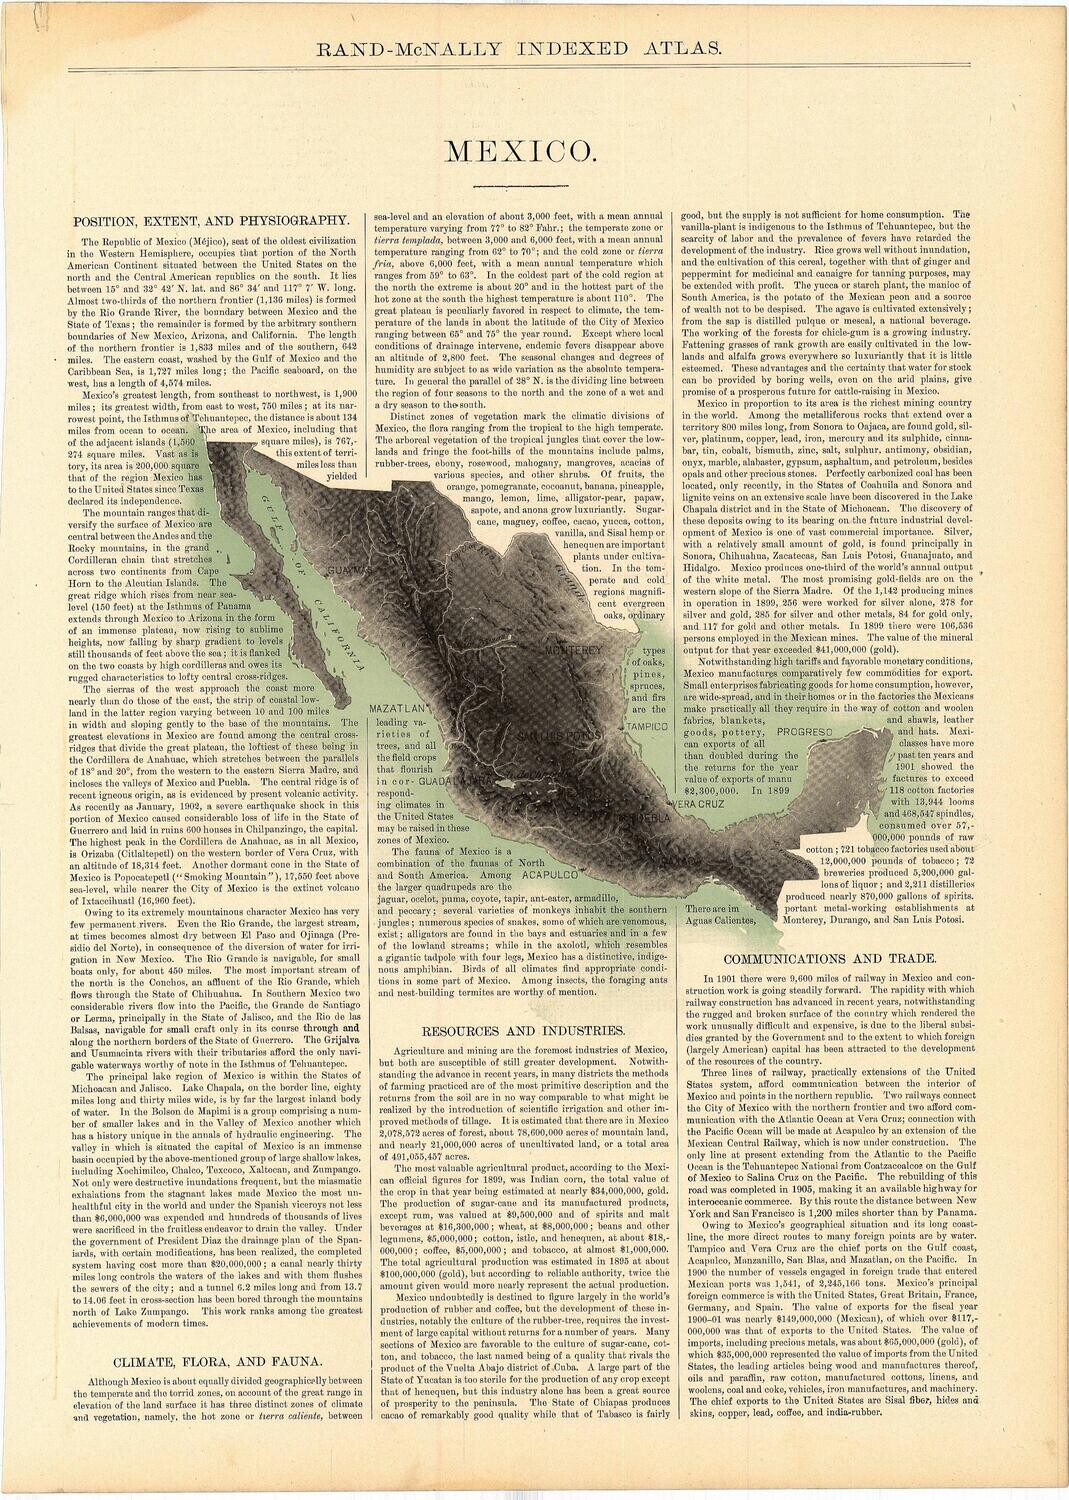 1912 Topographic Map of Mexico by Rand McNally in Duotone Lithgraphy w/ Text